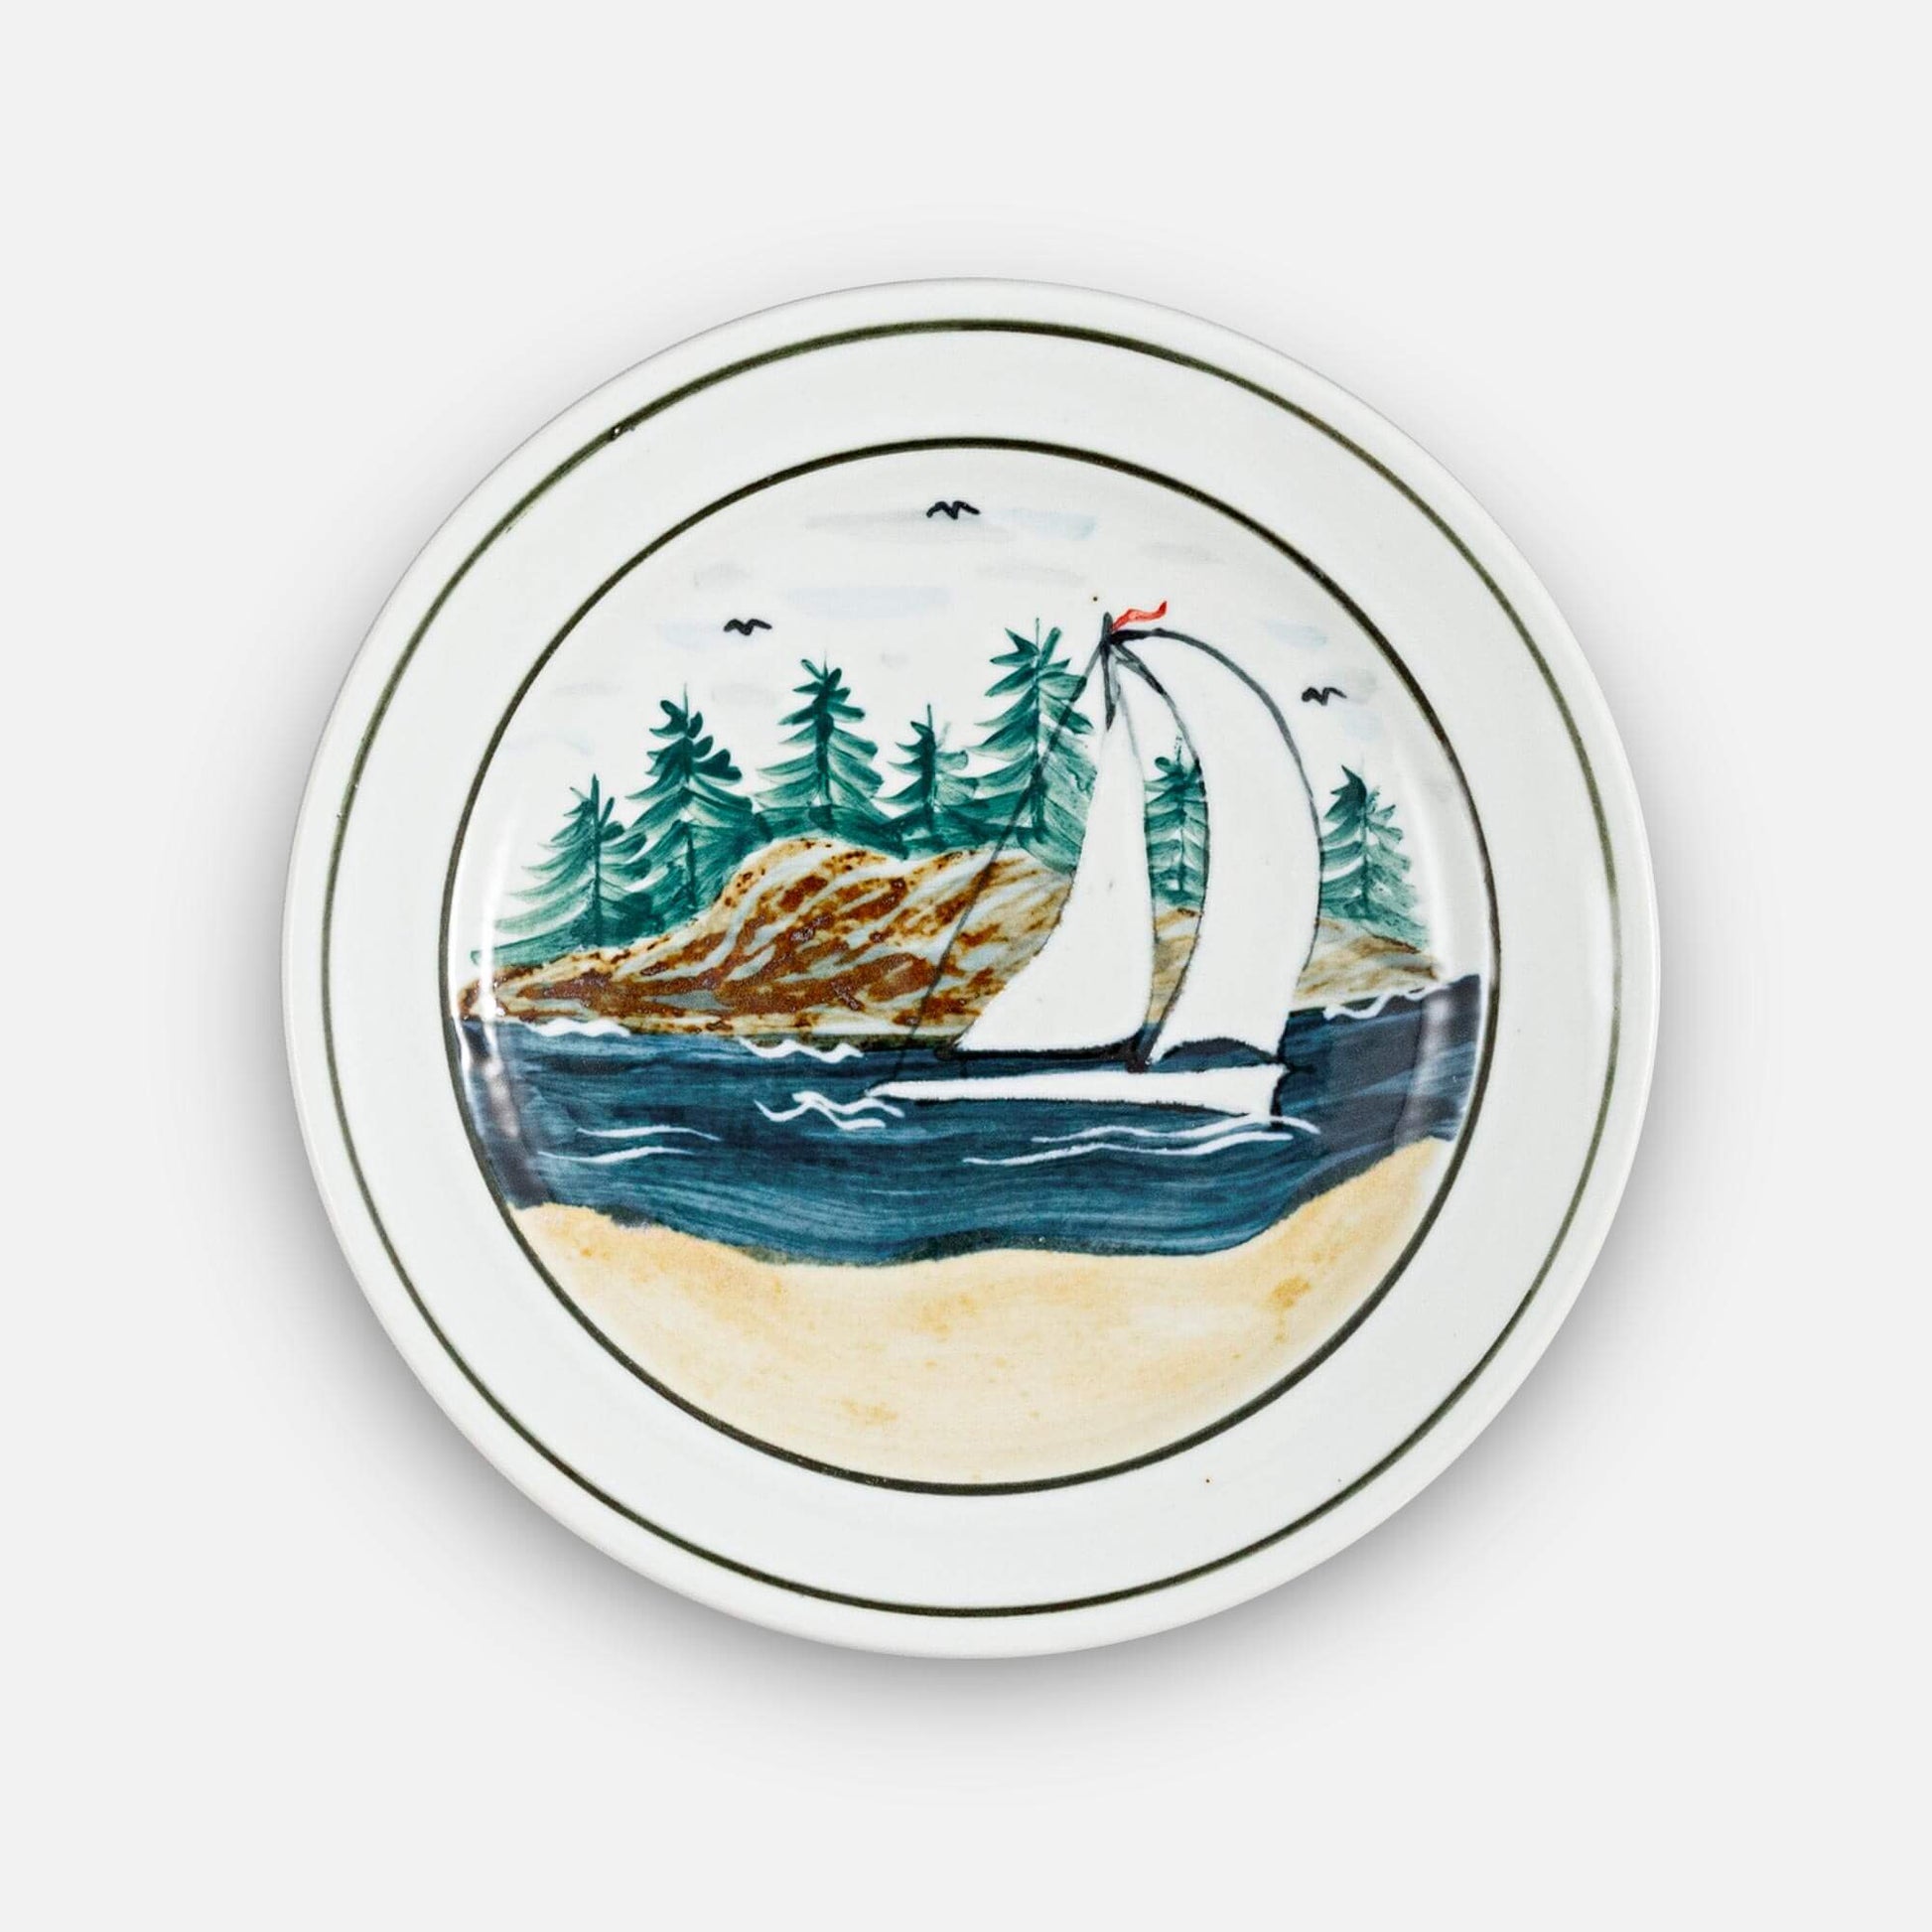 Handmade Pottery Classic Dessert Plate in Sailboat pattern made by Georgetown Pottery in Maine